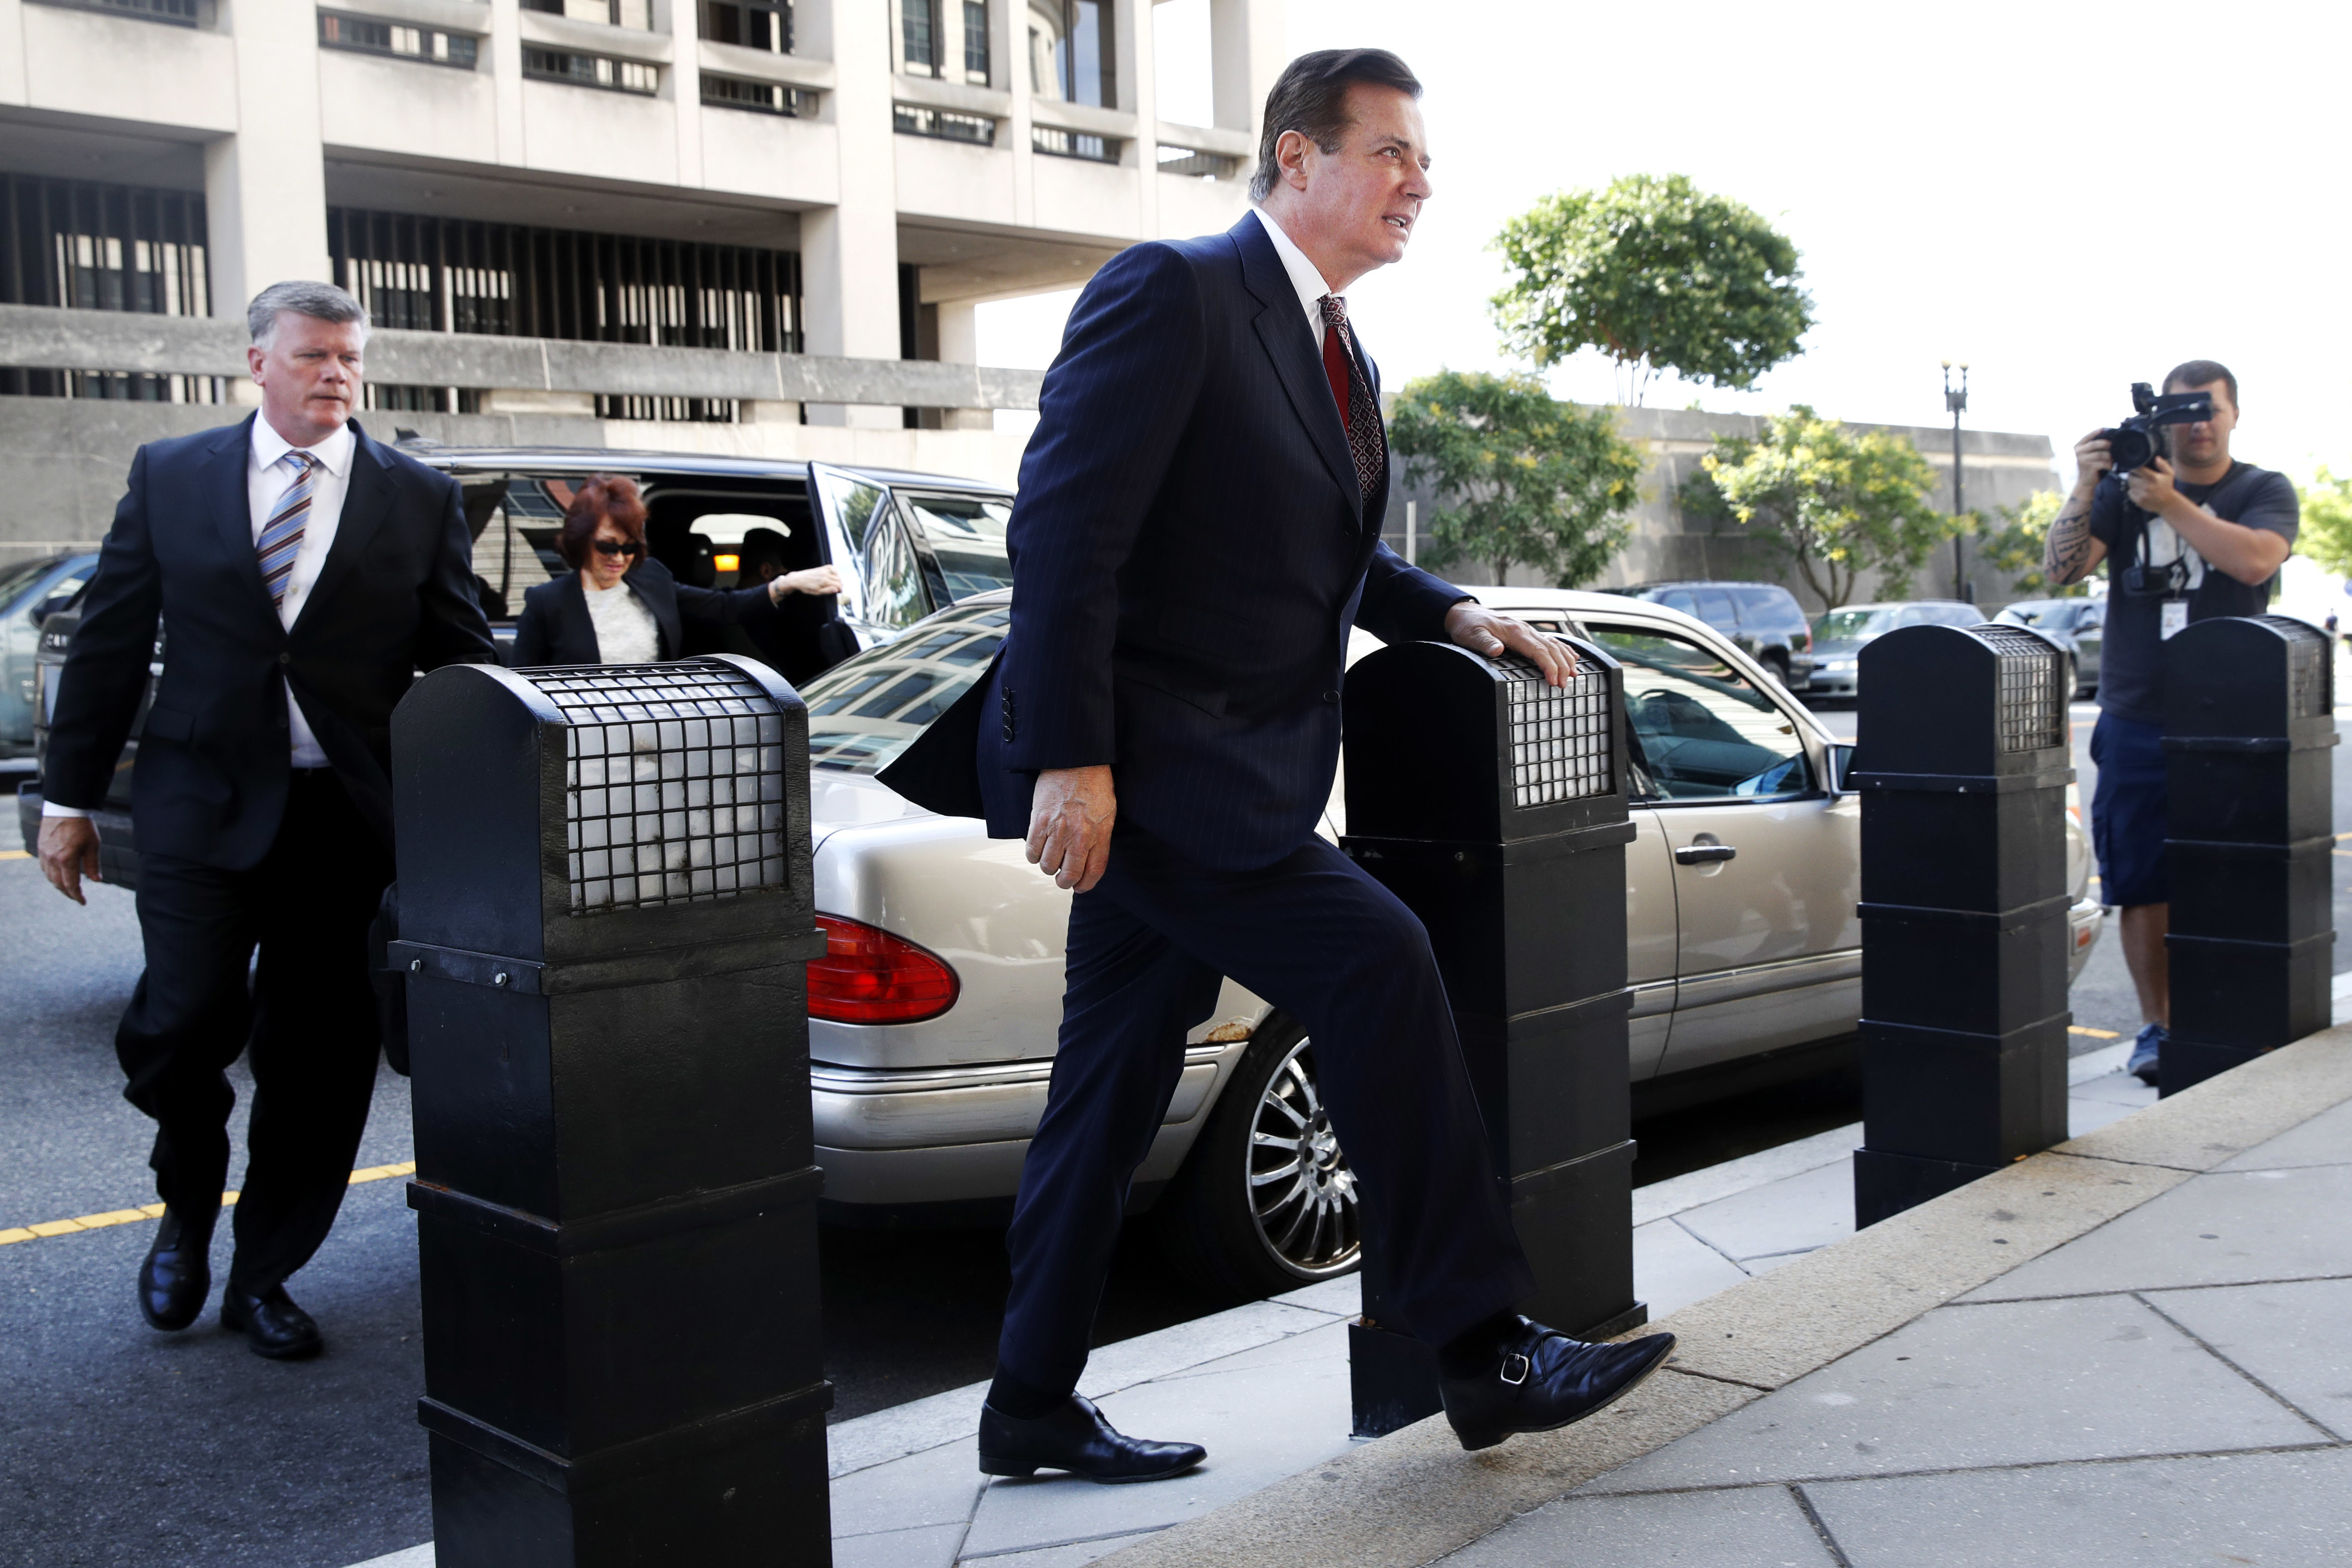 Paul Manafort arrives at federal court in Washington